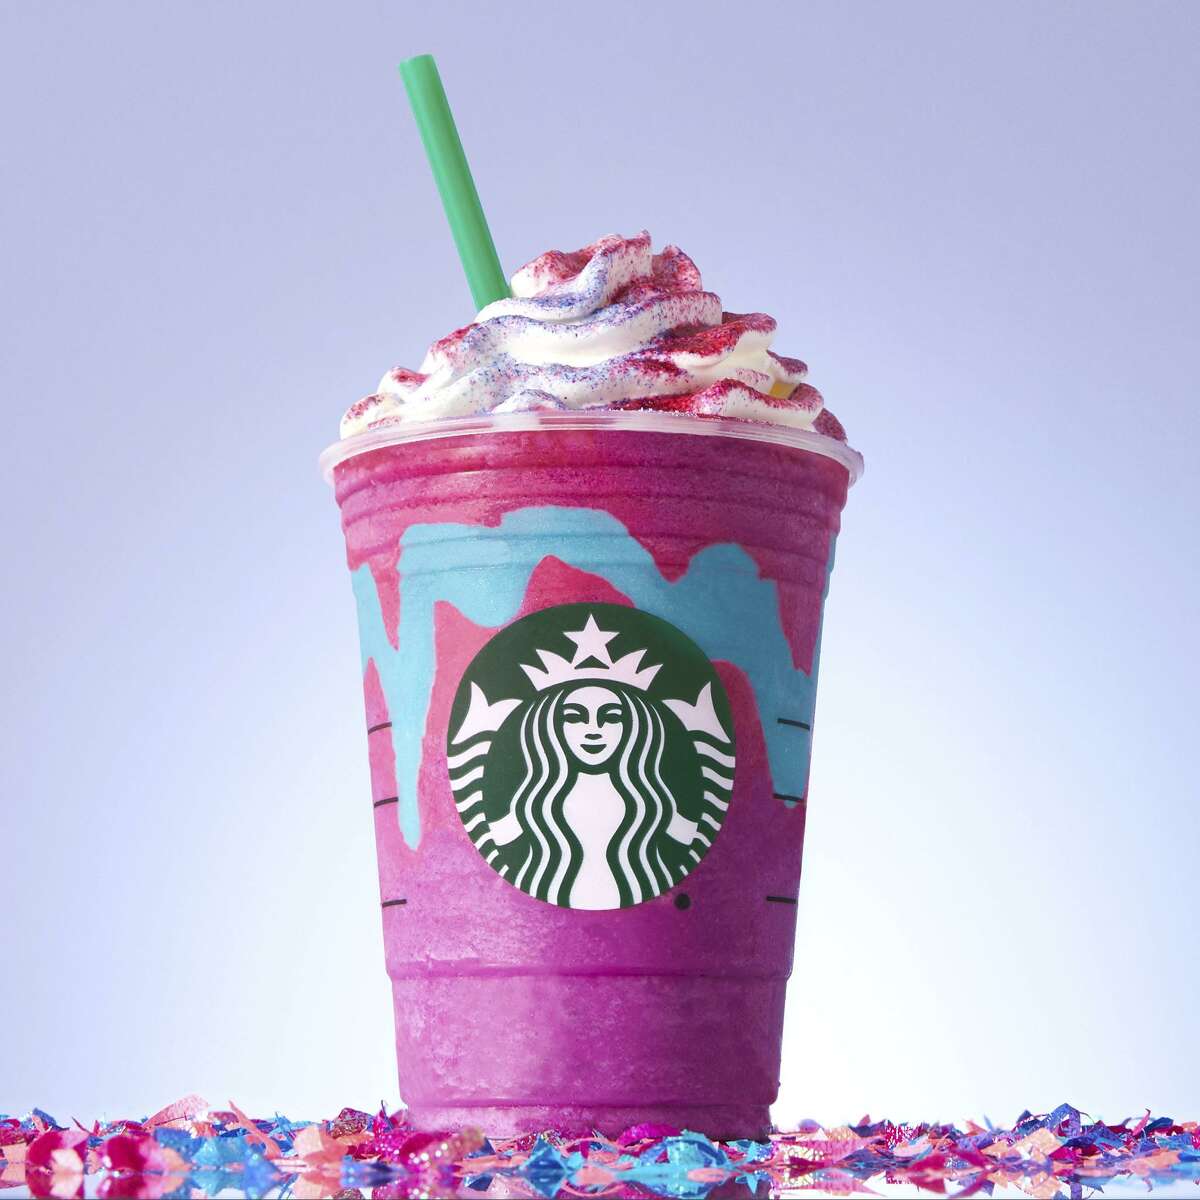 Starbucks says its newest beverage, Unicorn Frappuccino, not only changes colors with a stir of the straw, but flavors as well.